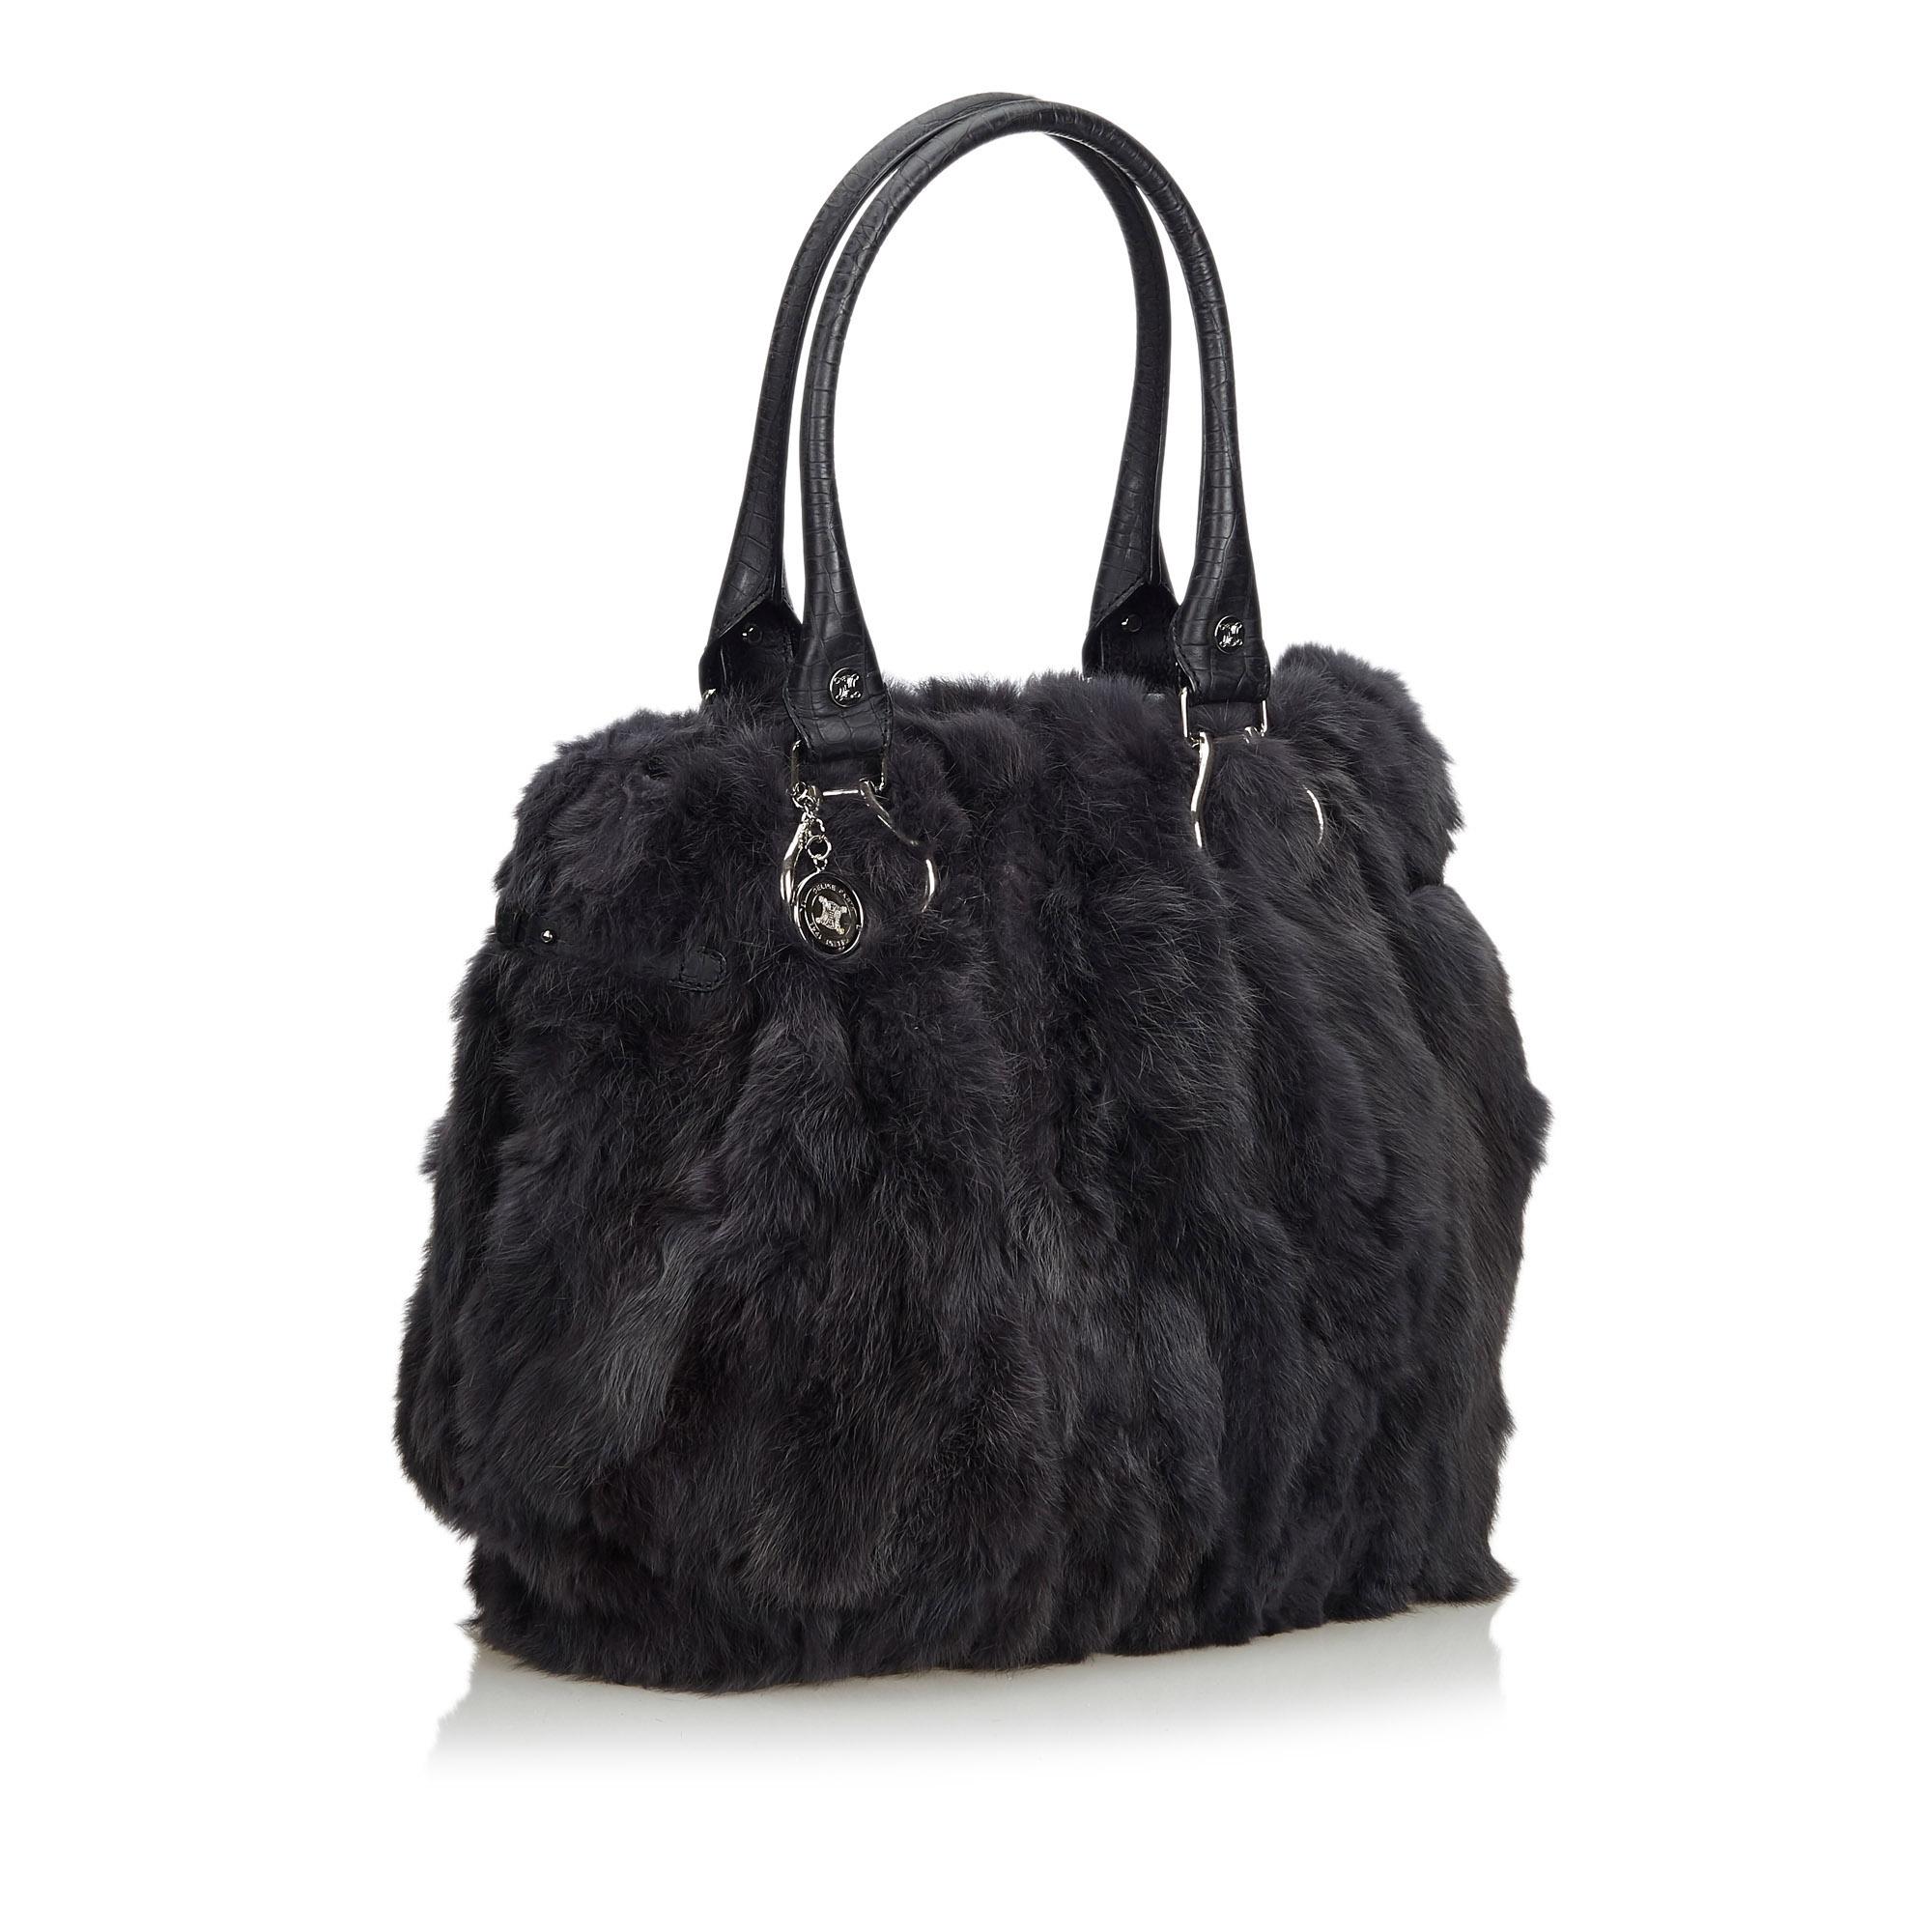 This tote bag features a fur body with leather trim, rolled leather handles, an open top, and interior zip and slip pockets. It carries as B+ condition rating.

Inclusions: 
This item does not come with inclusions.

Dimensions:
Length: 33.00